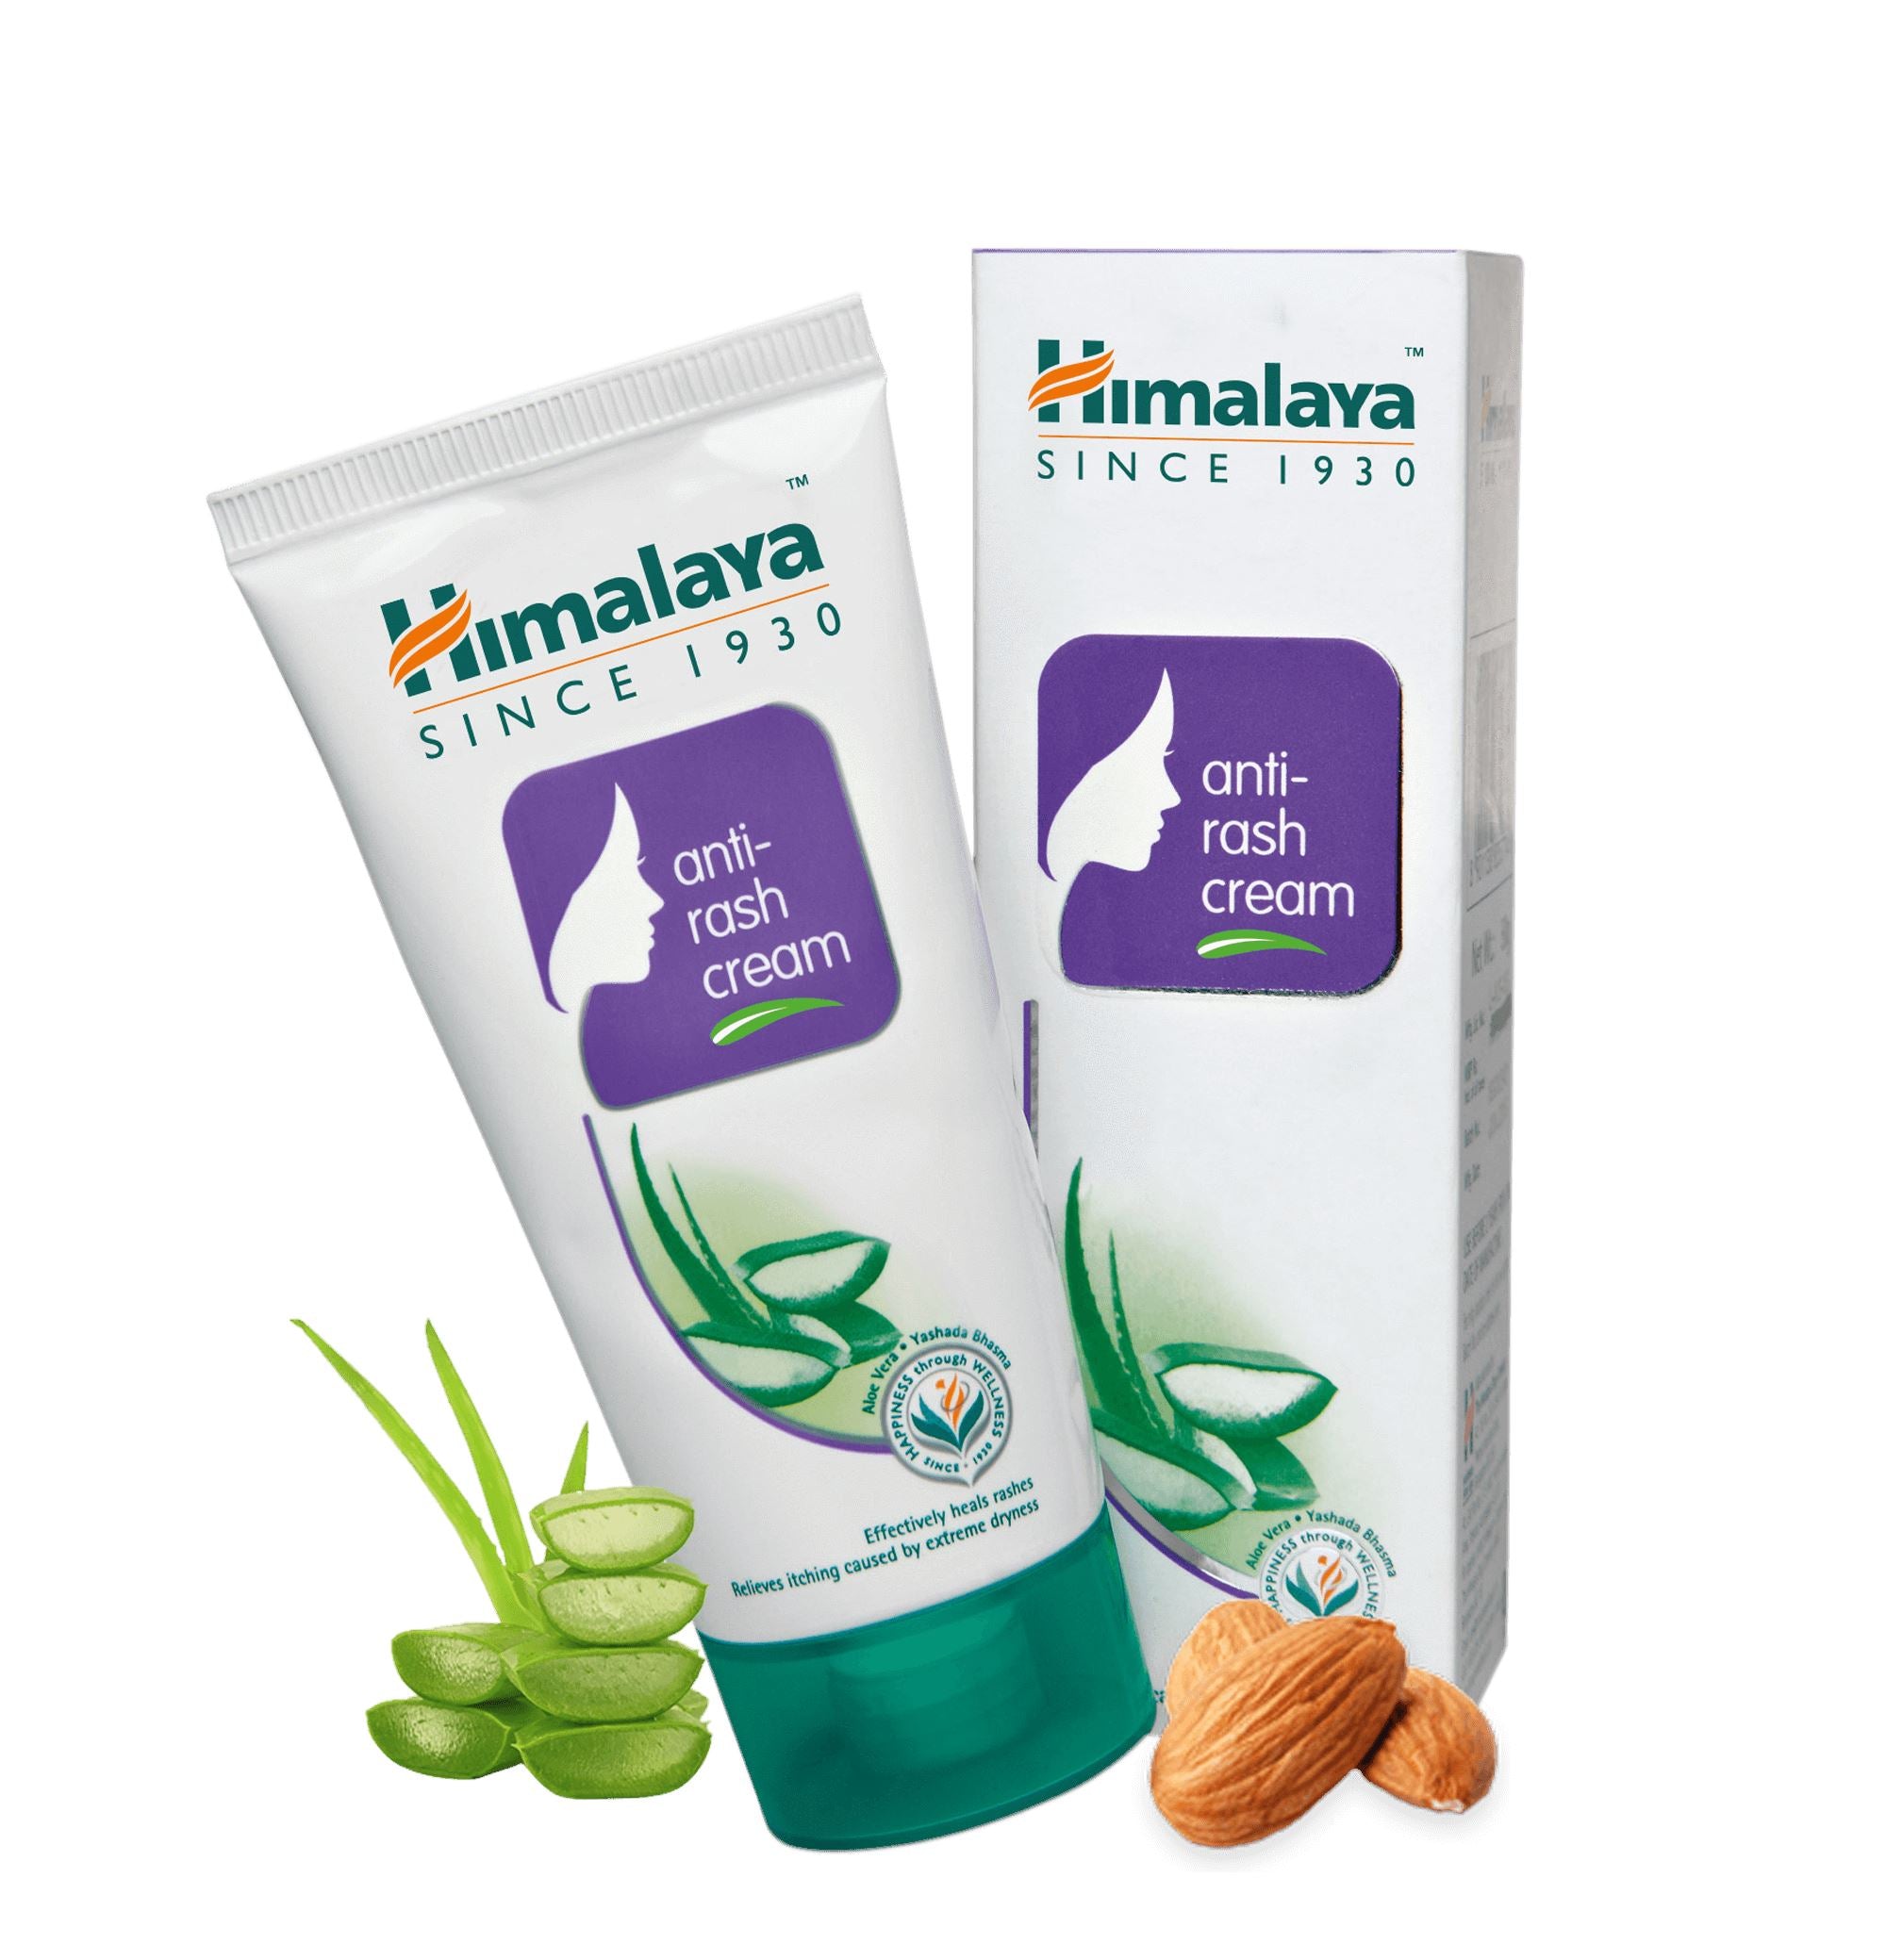 Himalaya Anti-rash cream - Effectively heals rashes and relieves itching